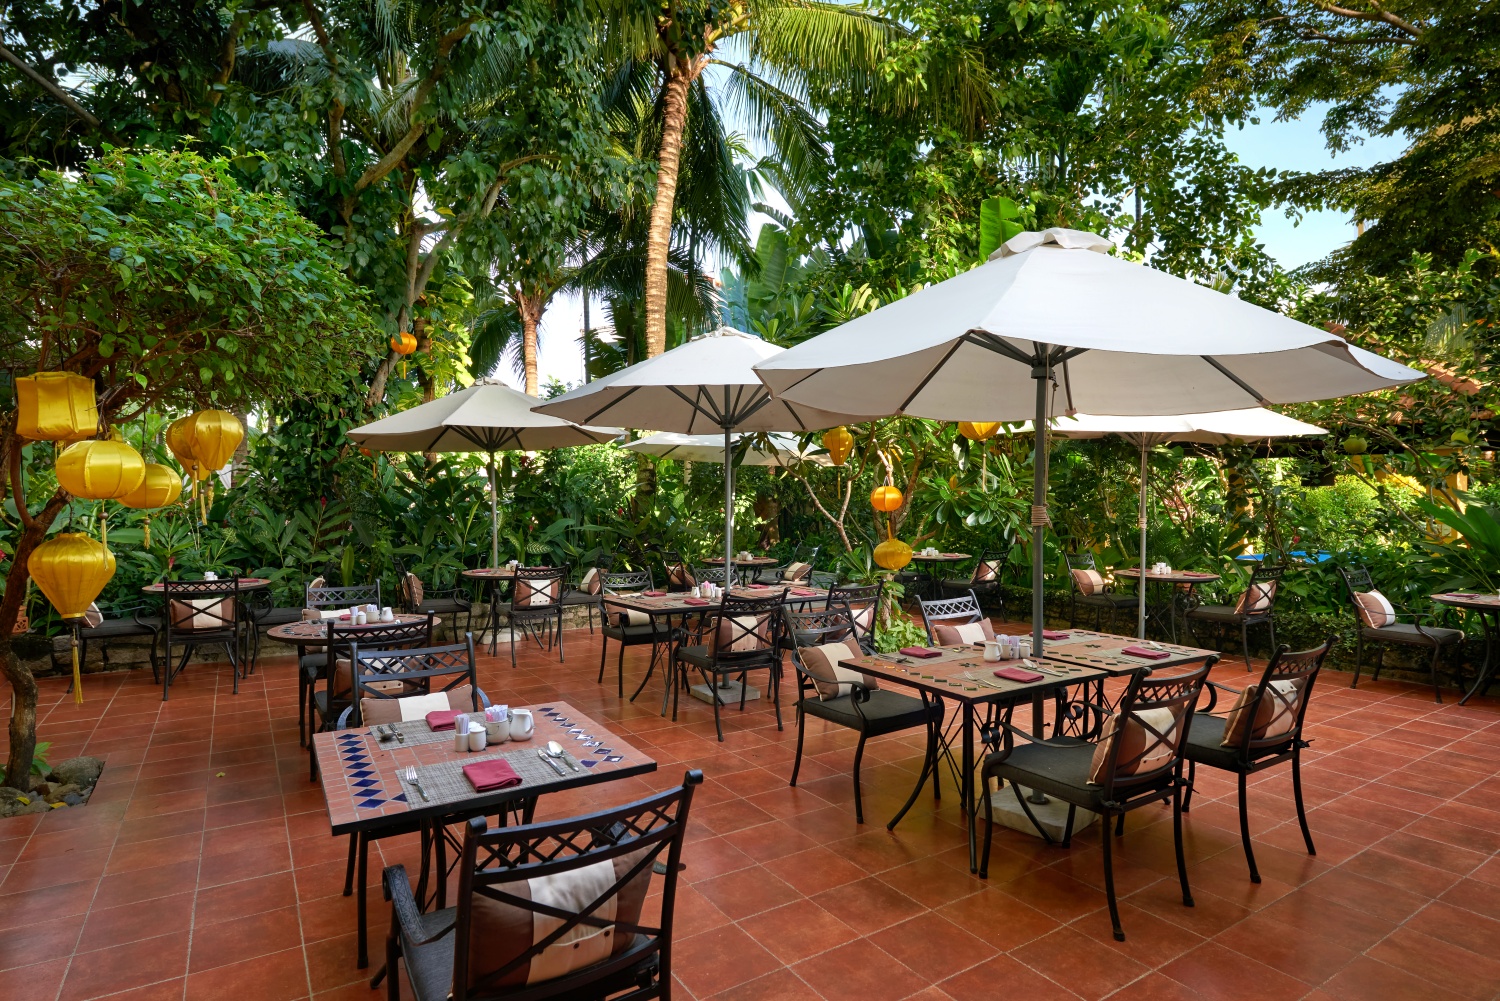 Red Bean Restaurant in Hoi An combines classic Vietnamese tastes with creative culinary methods